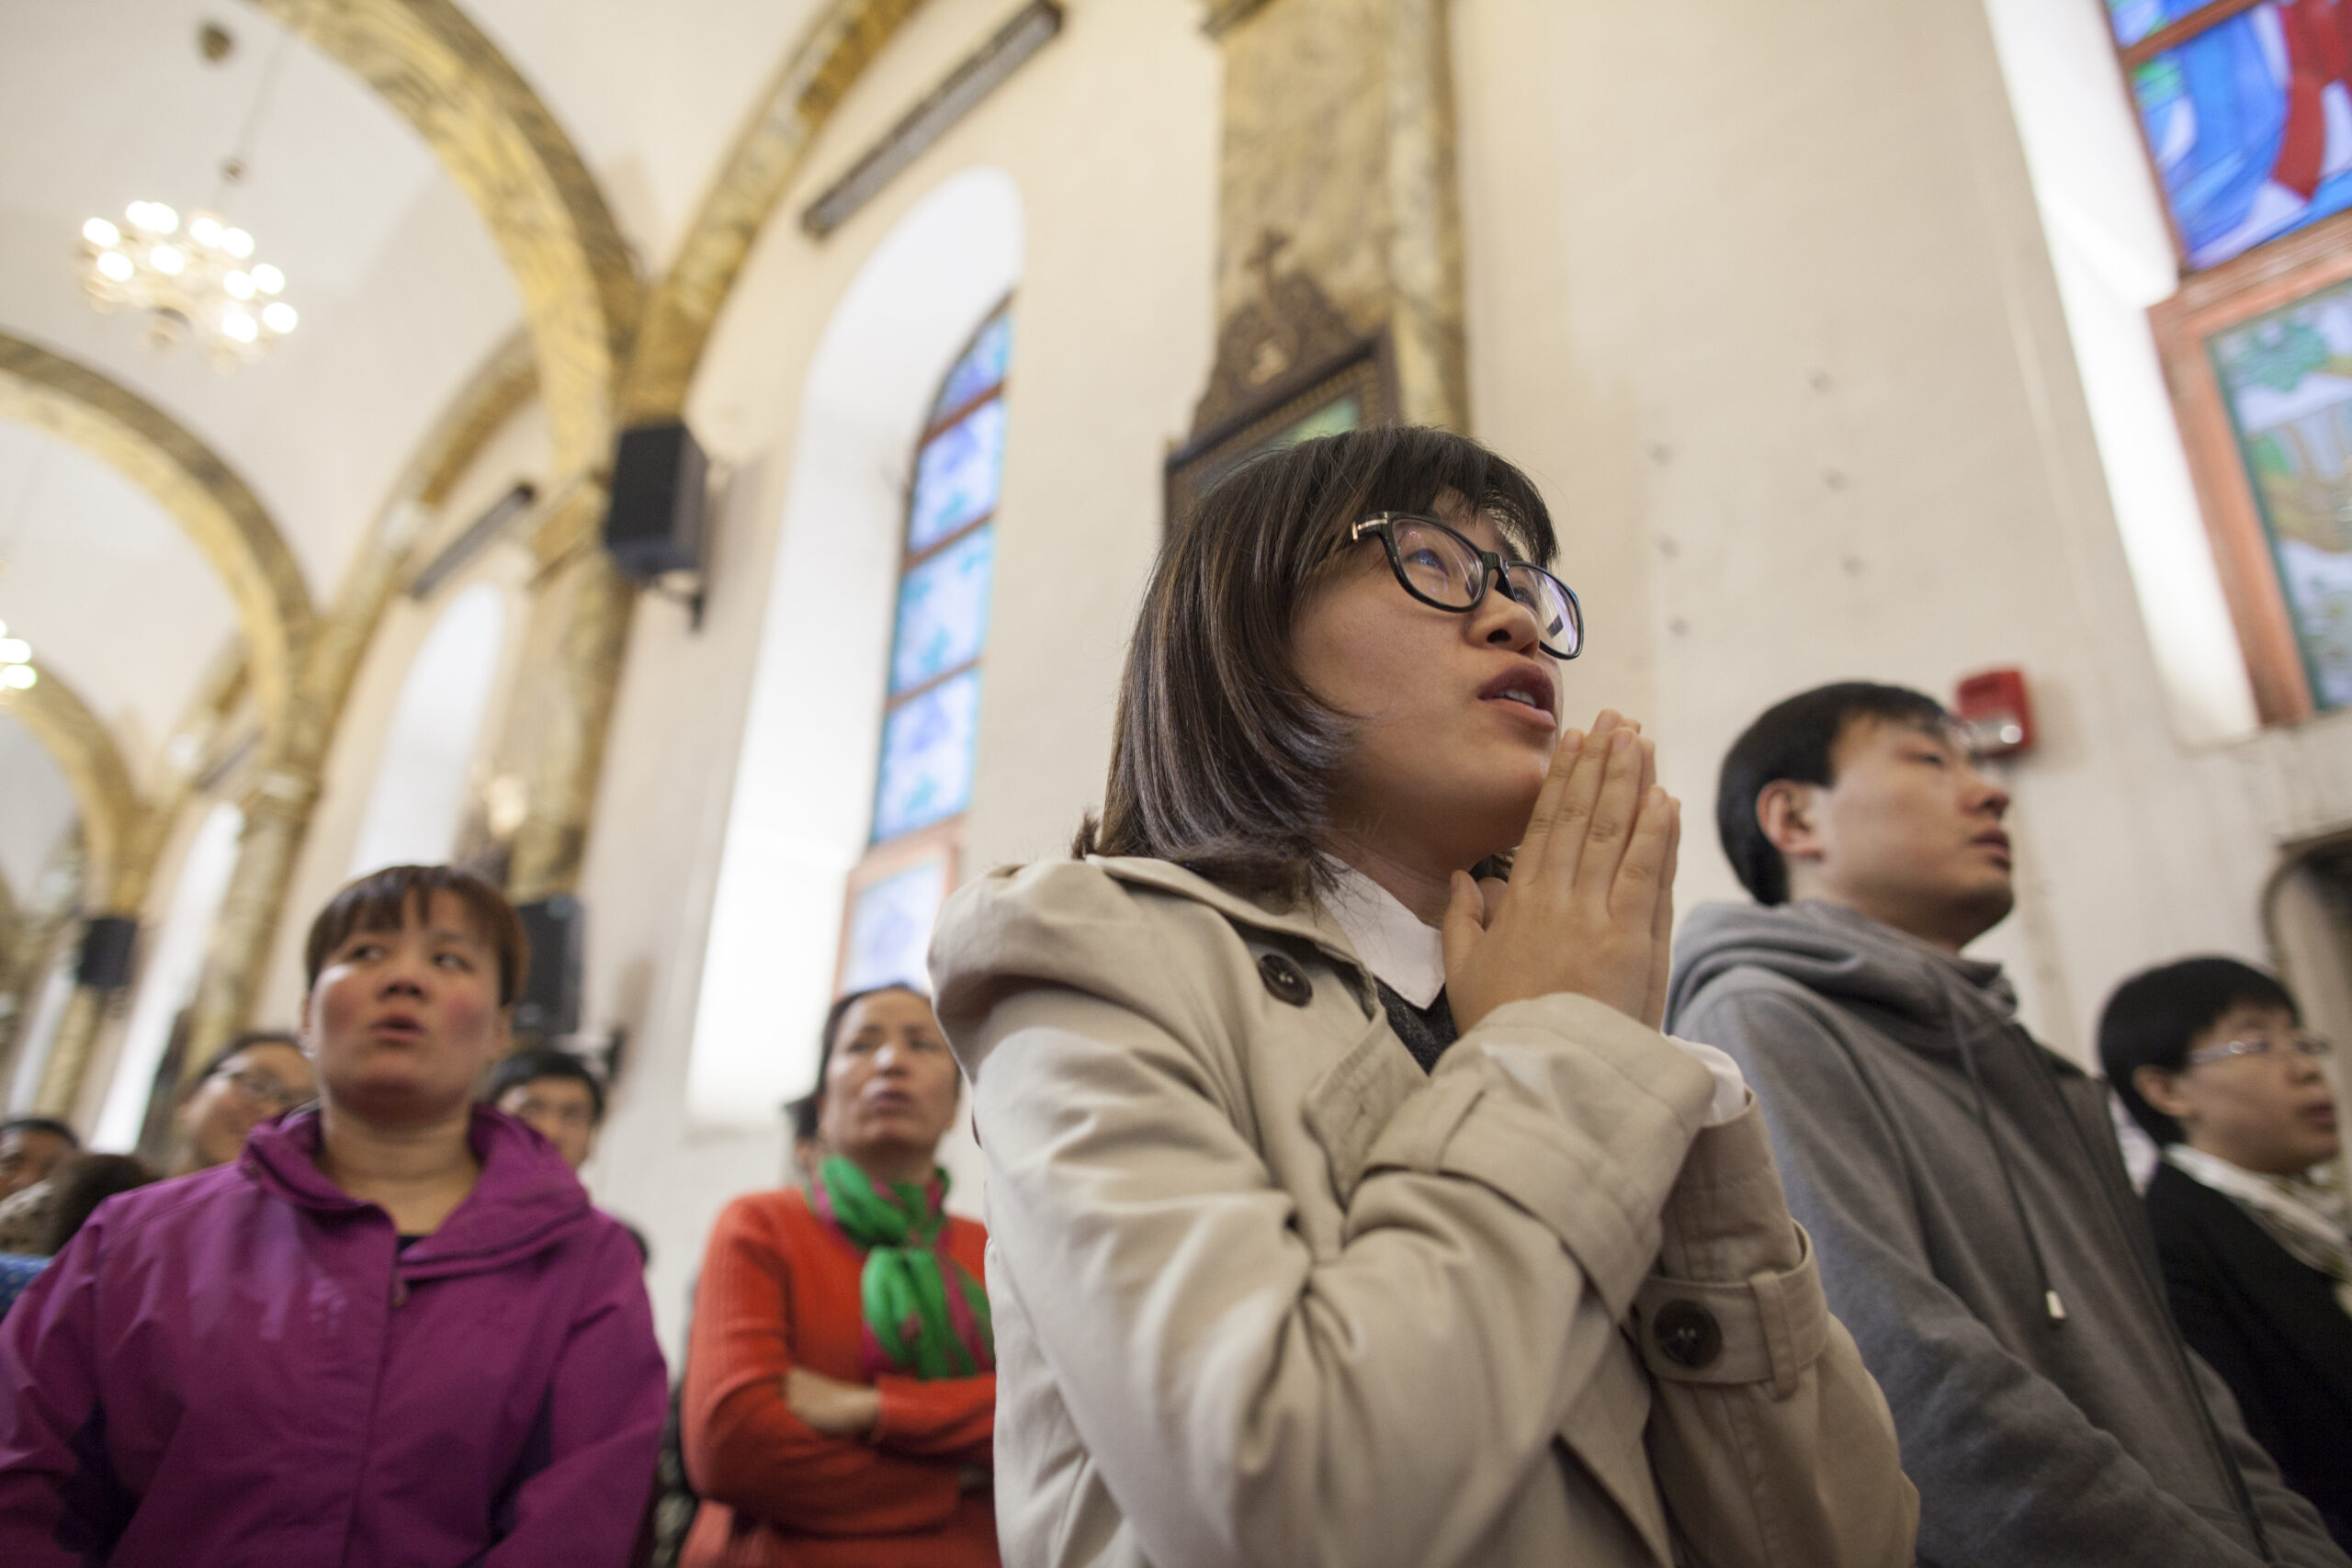 Worshiper At Cathedral Of The Immaculate Conception